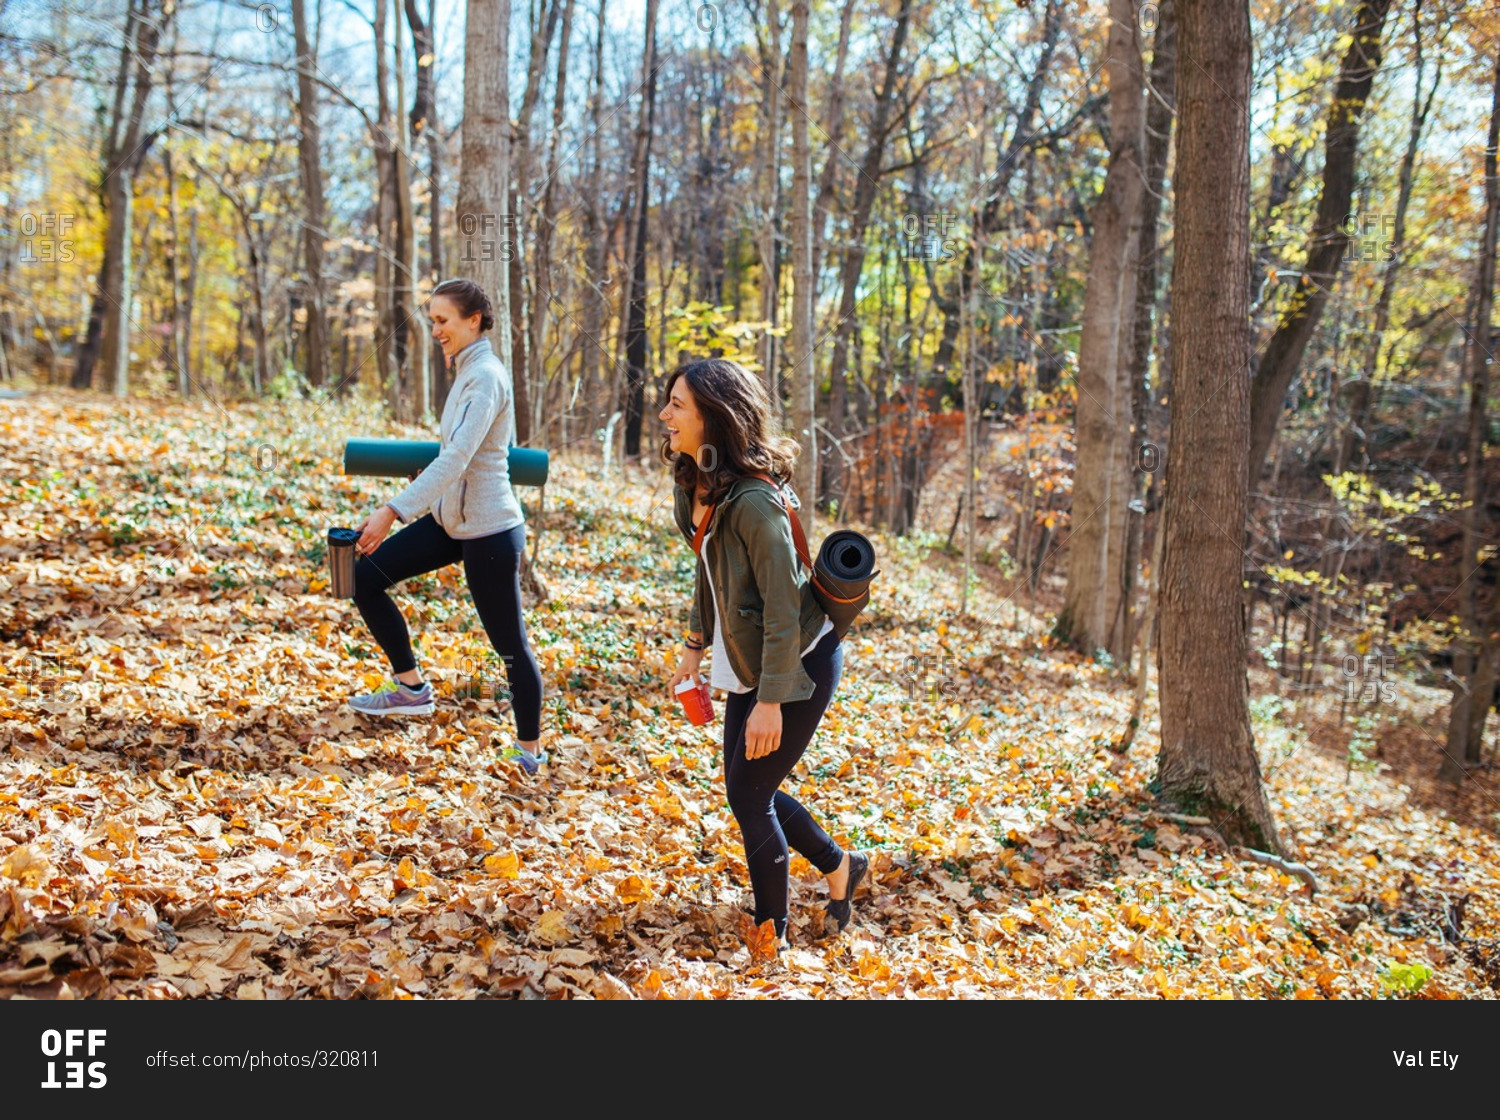 Women carrying their yoga mats in autumn woods for workout